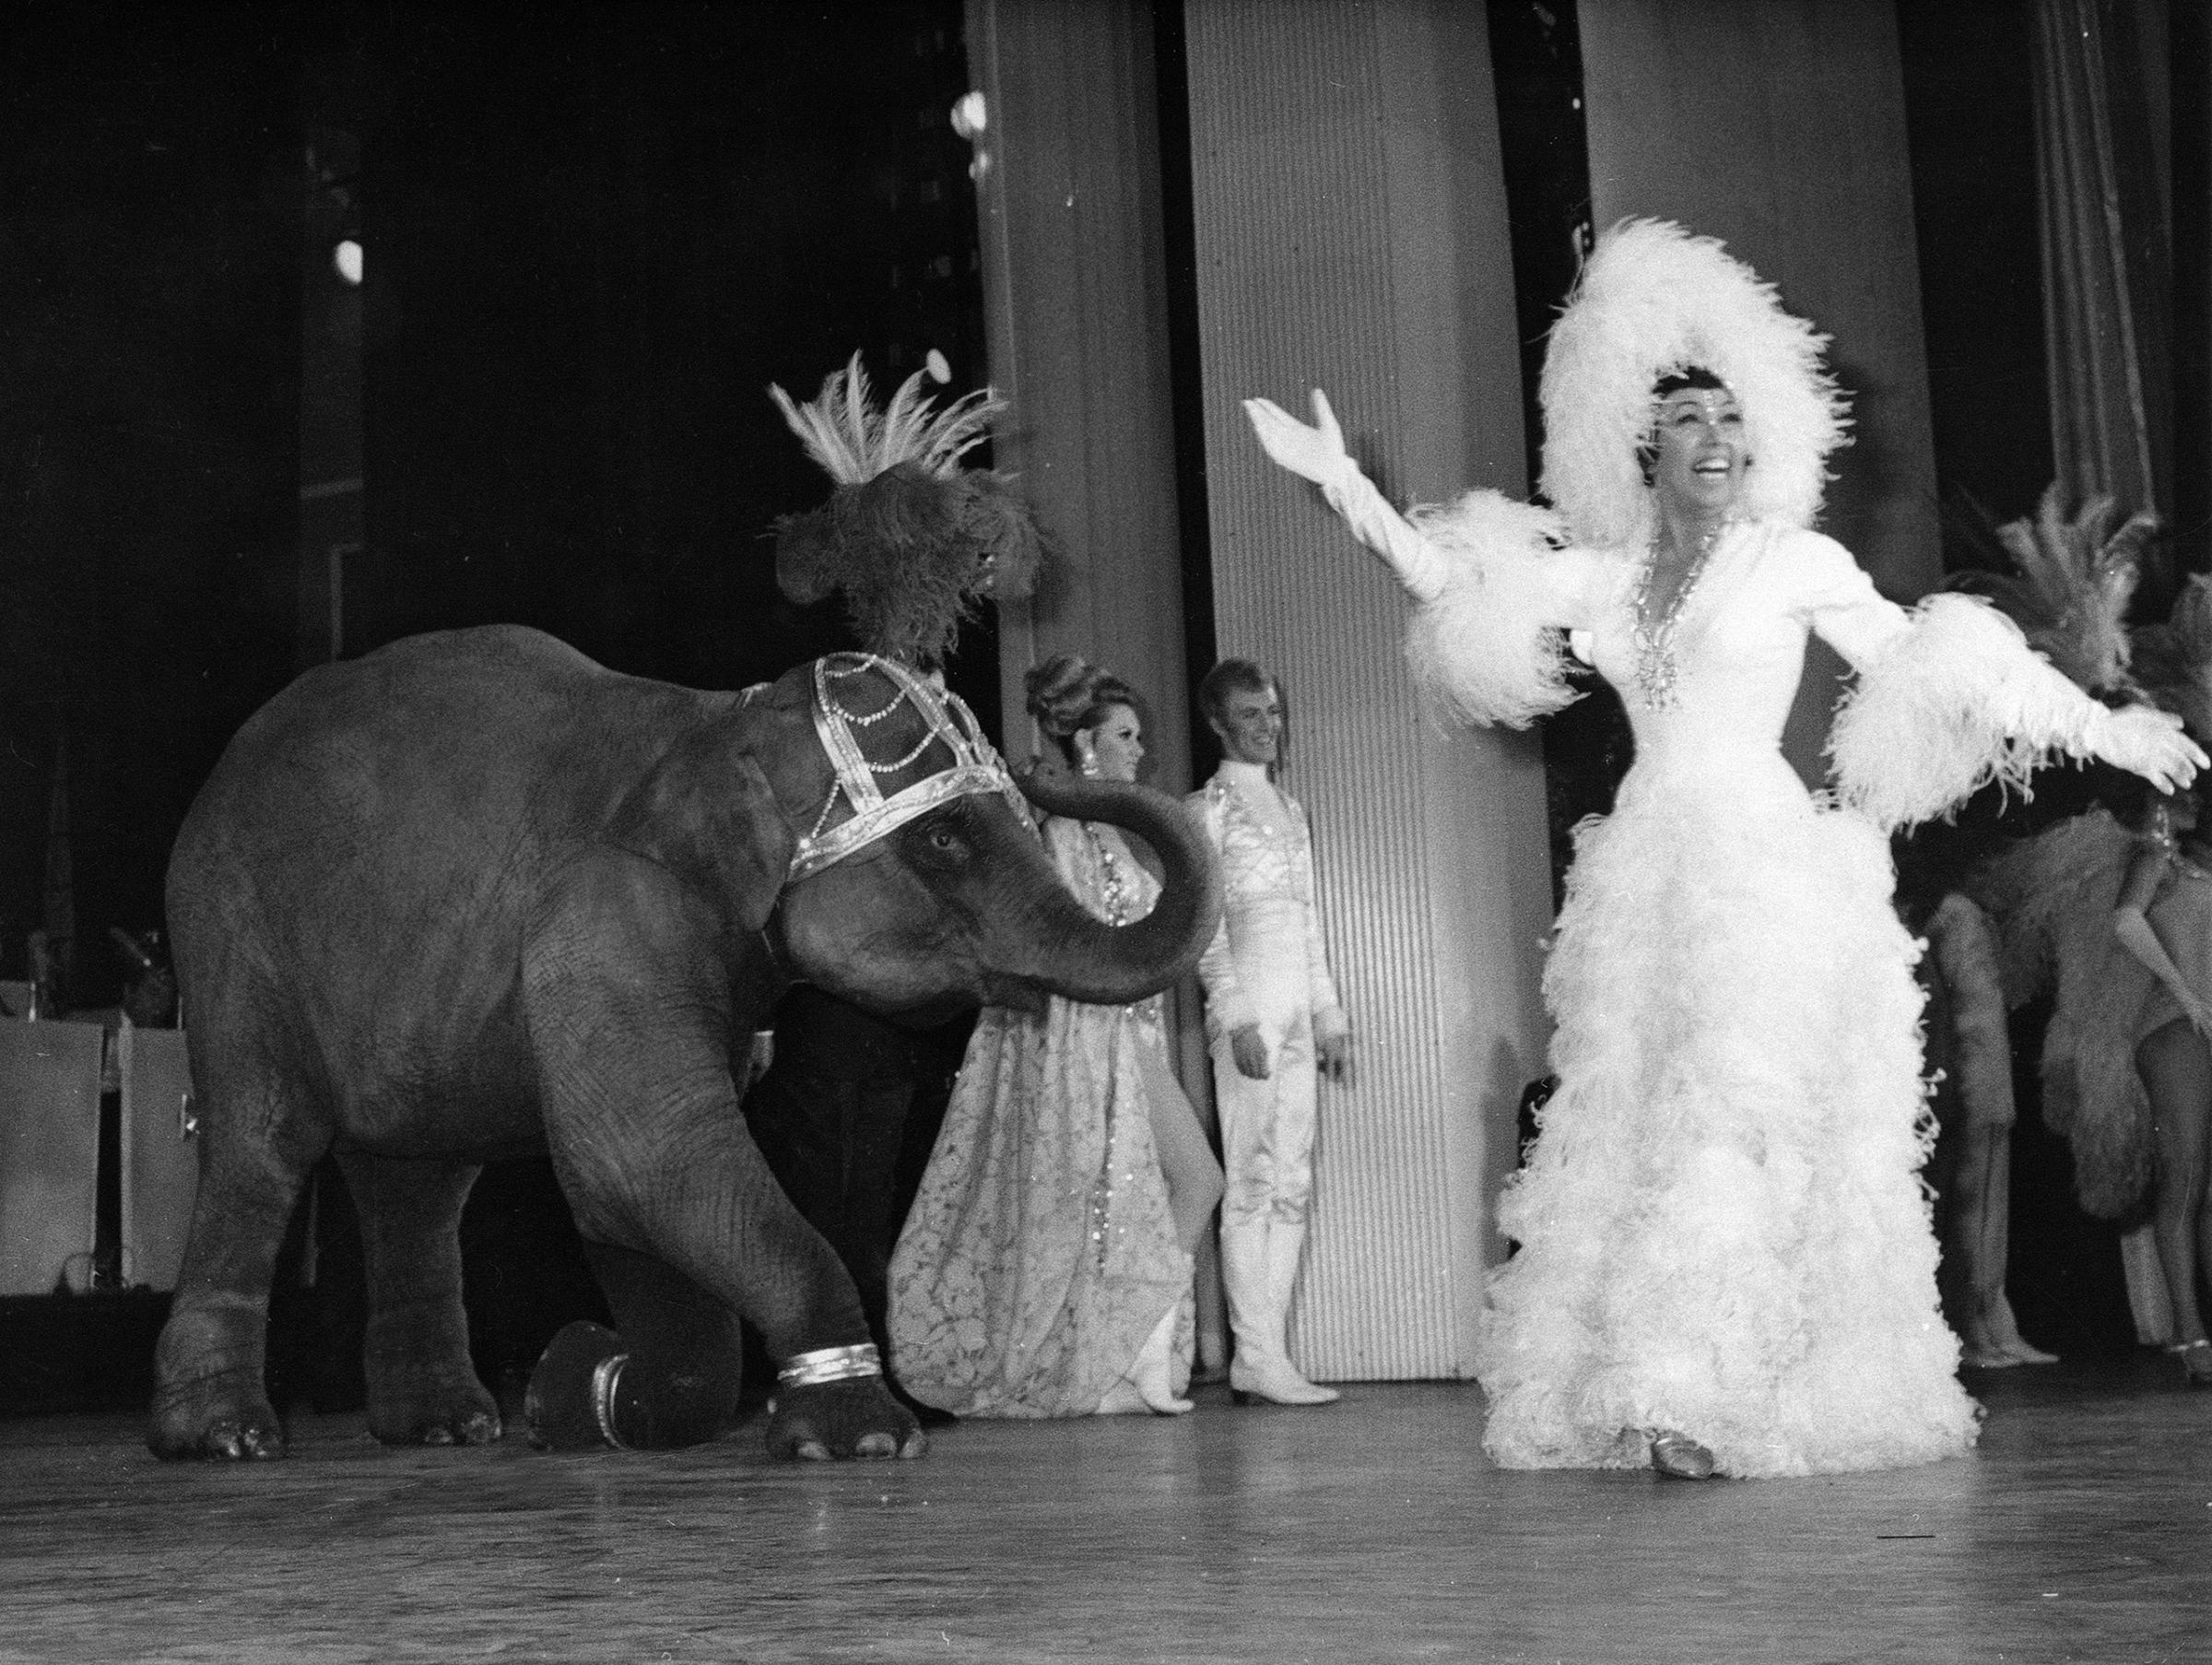 Josephine Baker appears with a young elephant on stage during her gala premiere at the Olympia Theatre in Paris, April 4, 1968.